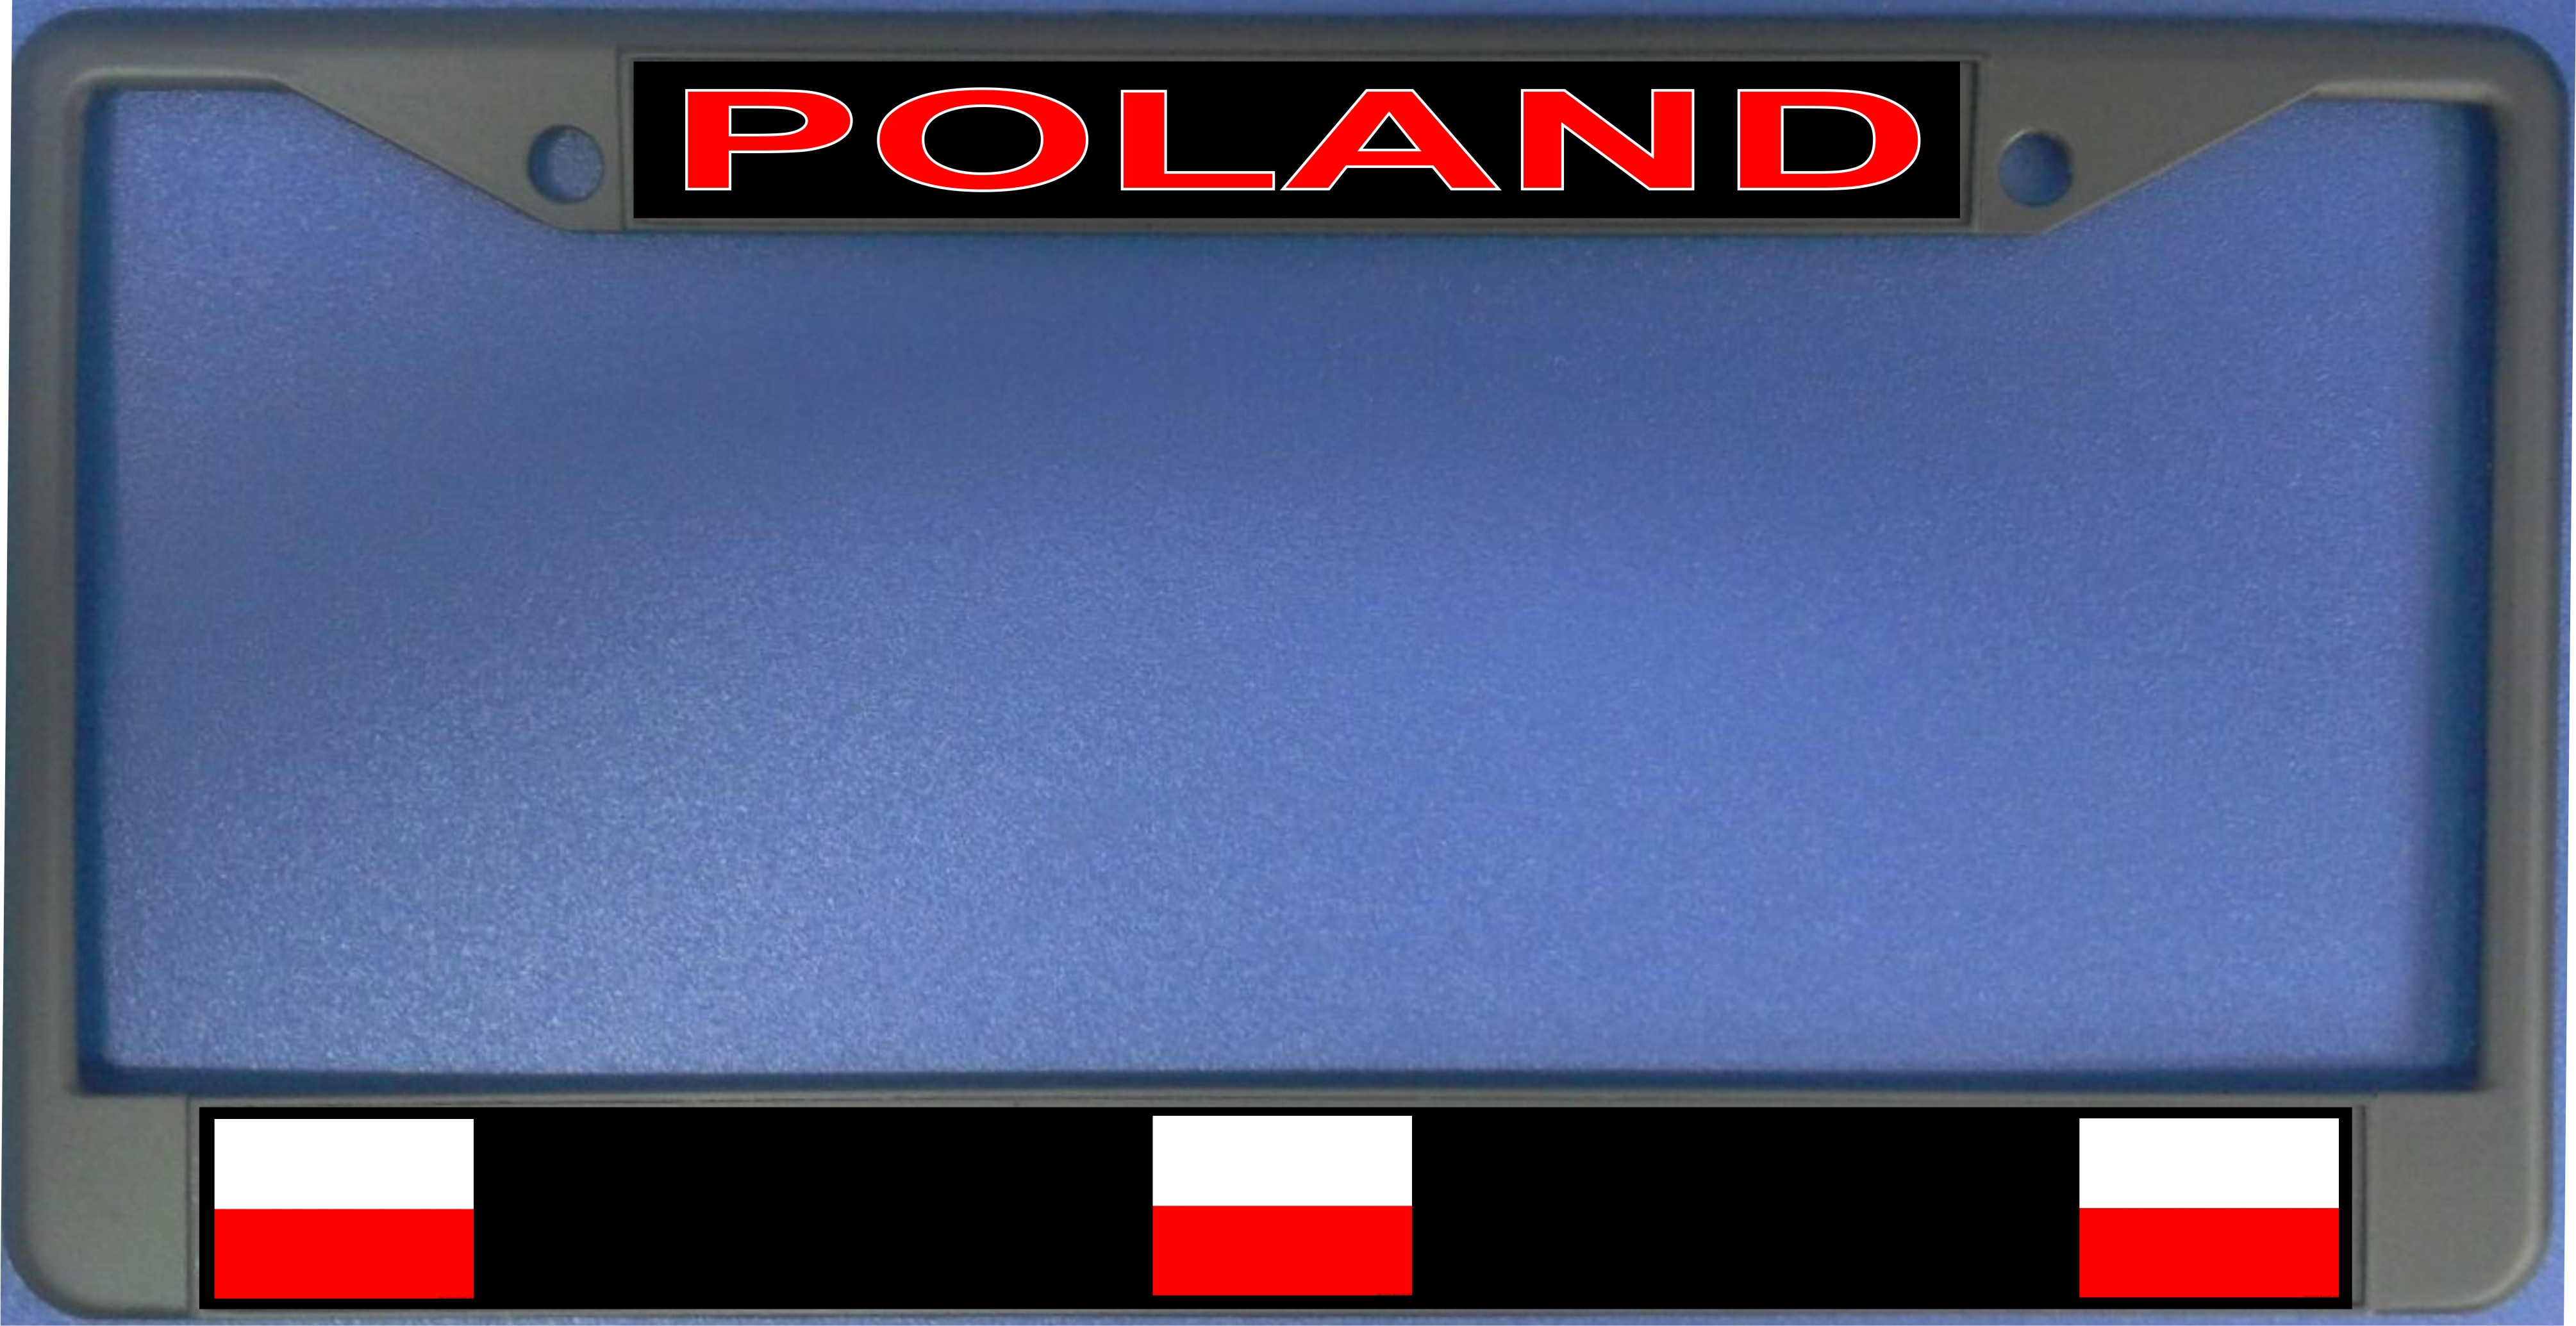 Poland Flag Photo License Plate Frame  Free SCREW Caps with this Frame